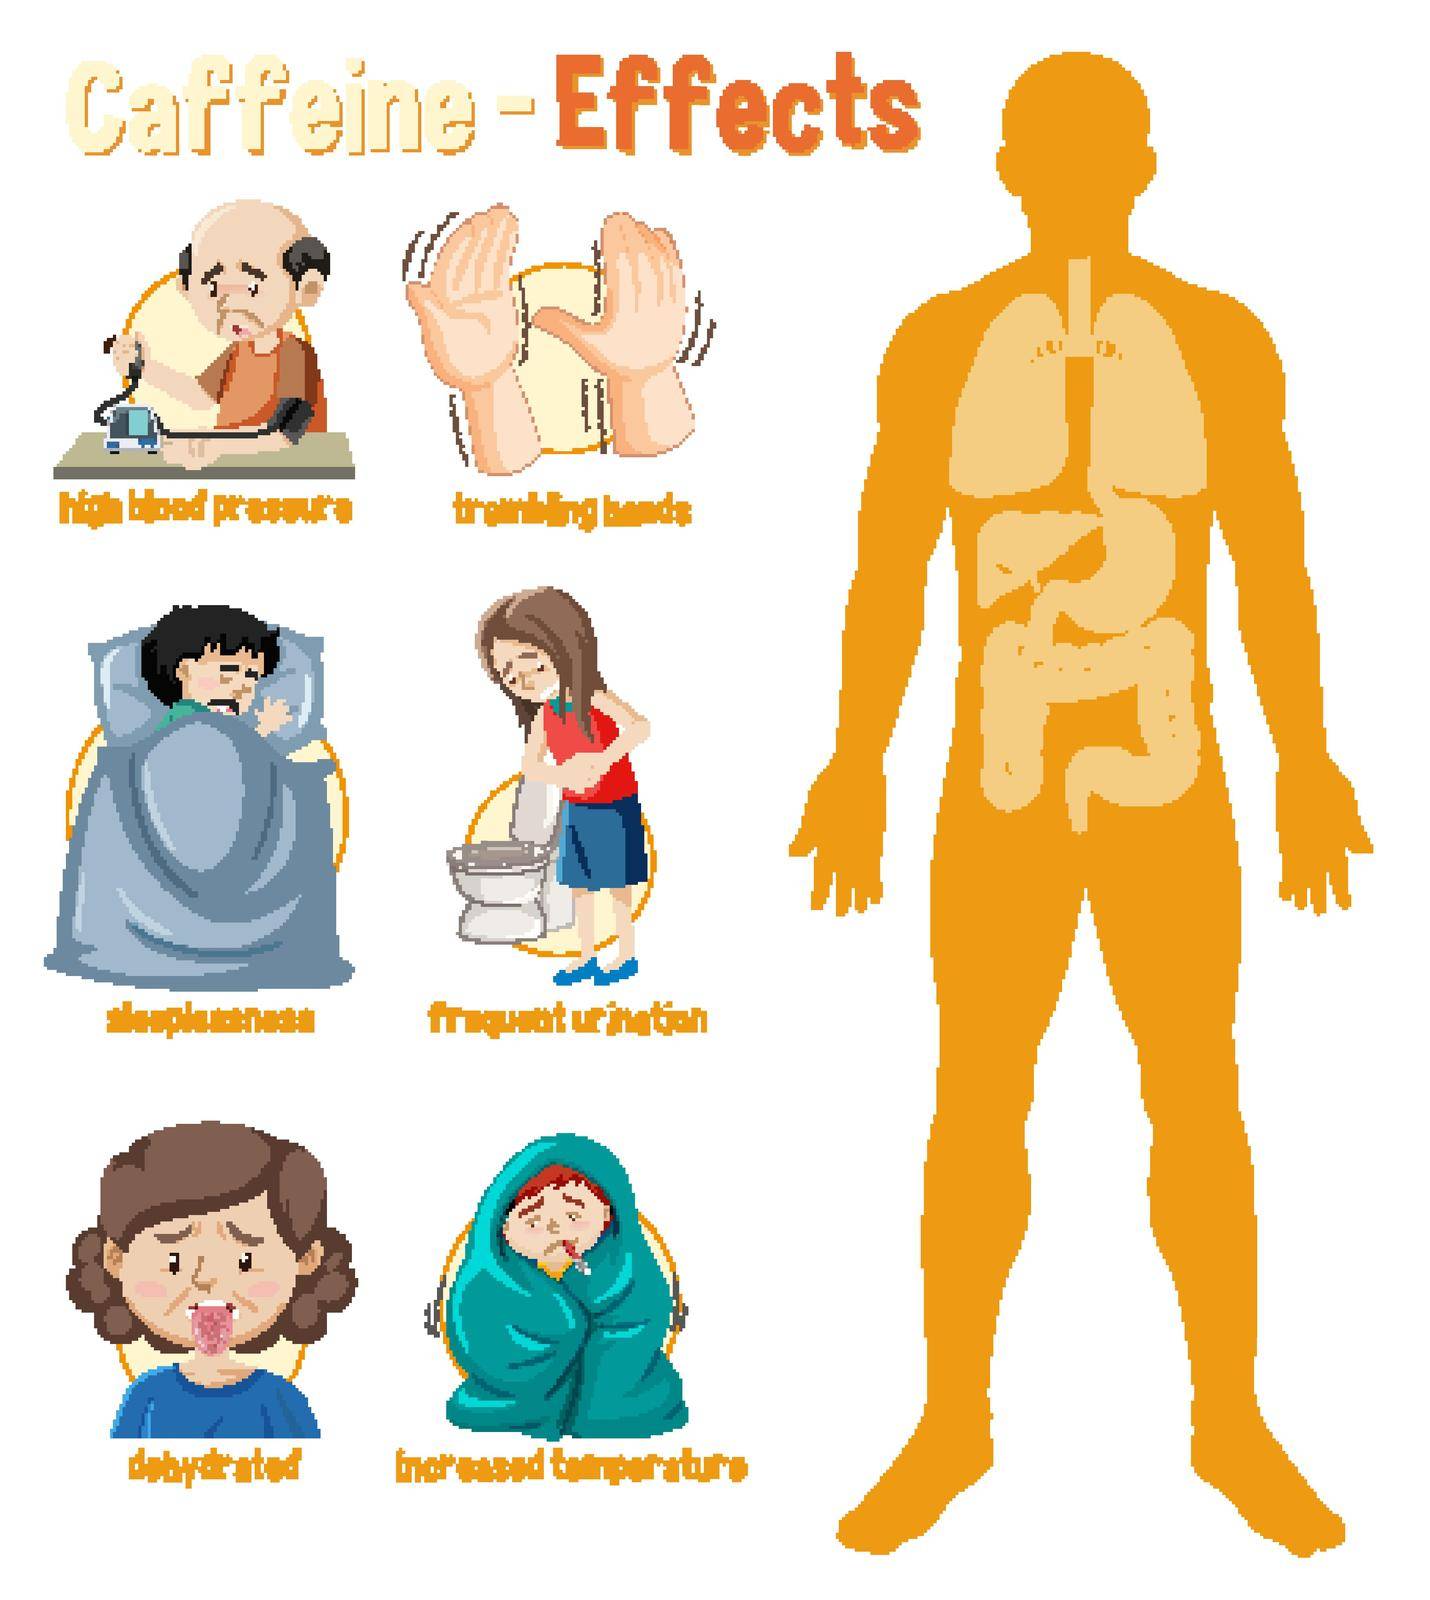 Health effects of Caffeine Infographic by iimages